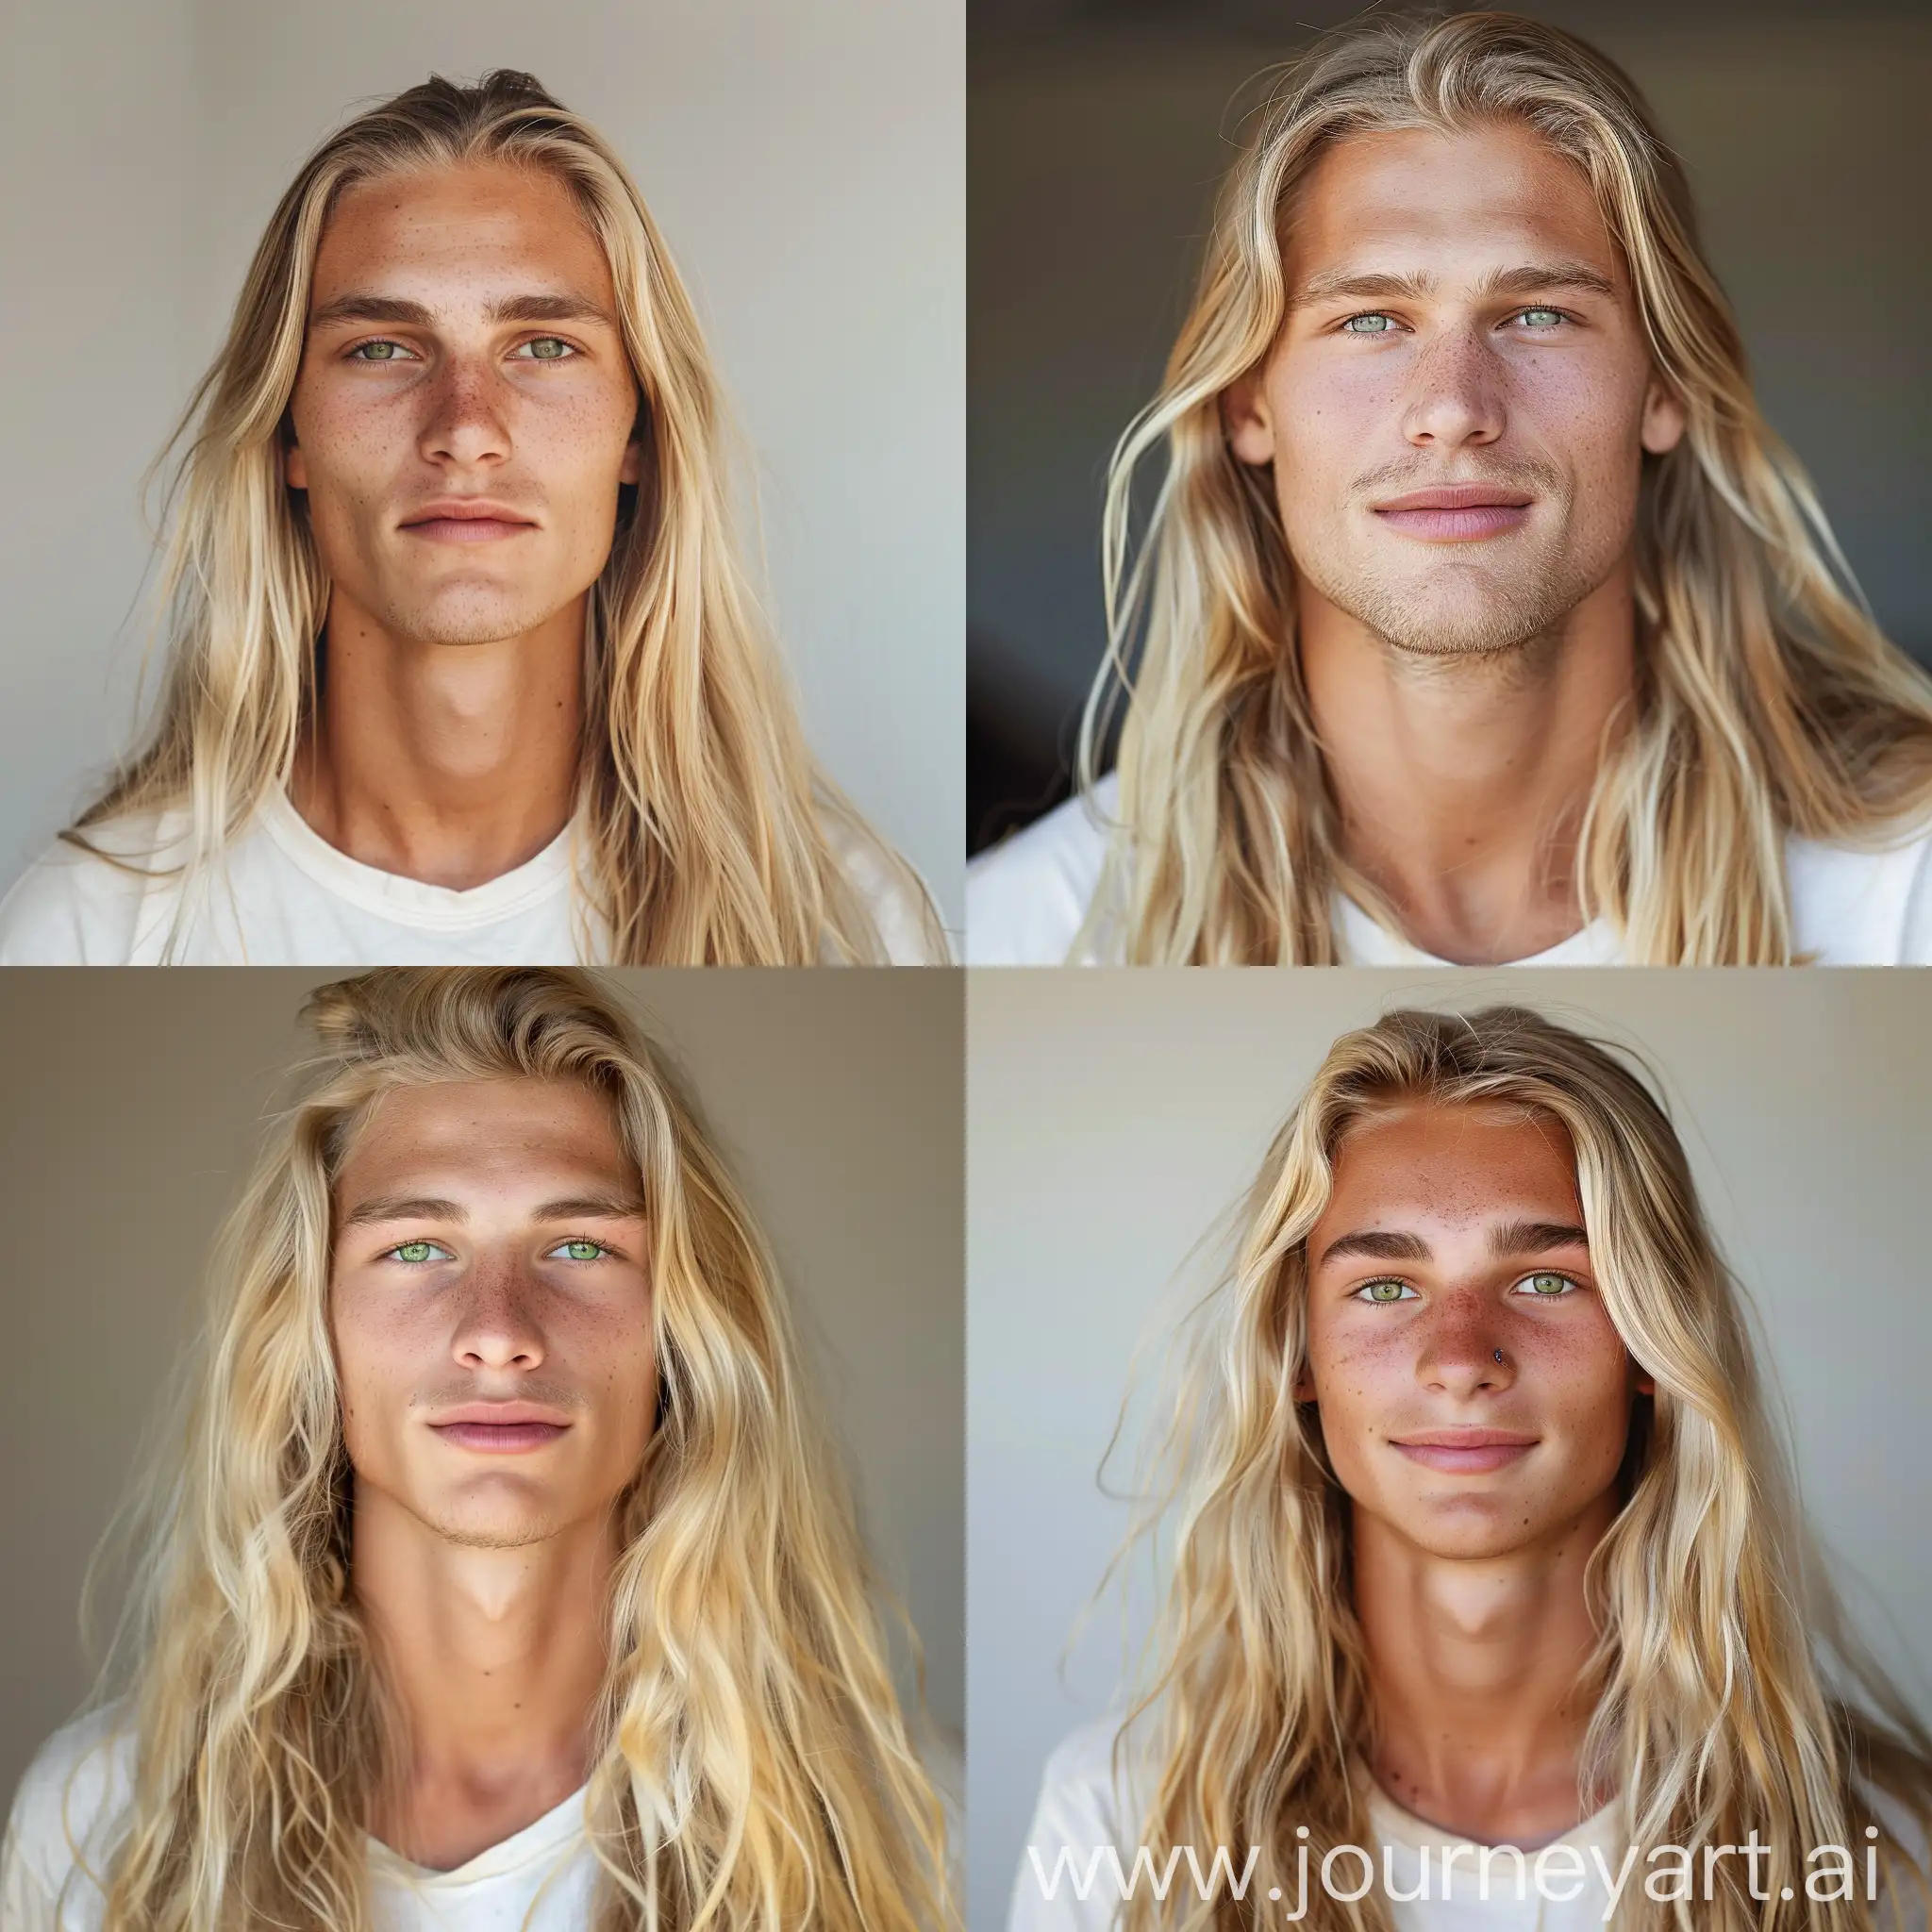 blond guy with long hair. stands at full height. thin nose. green sandy eyes, gentle smile